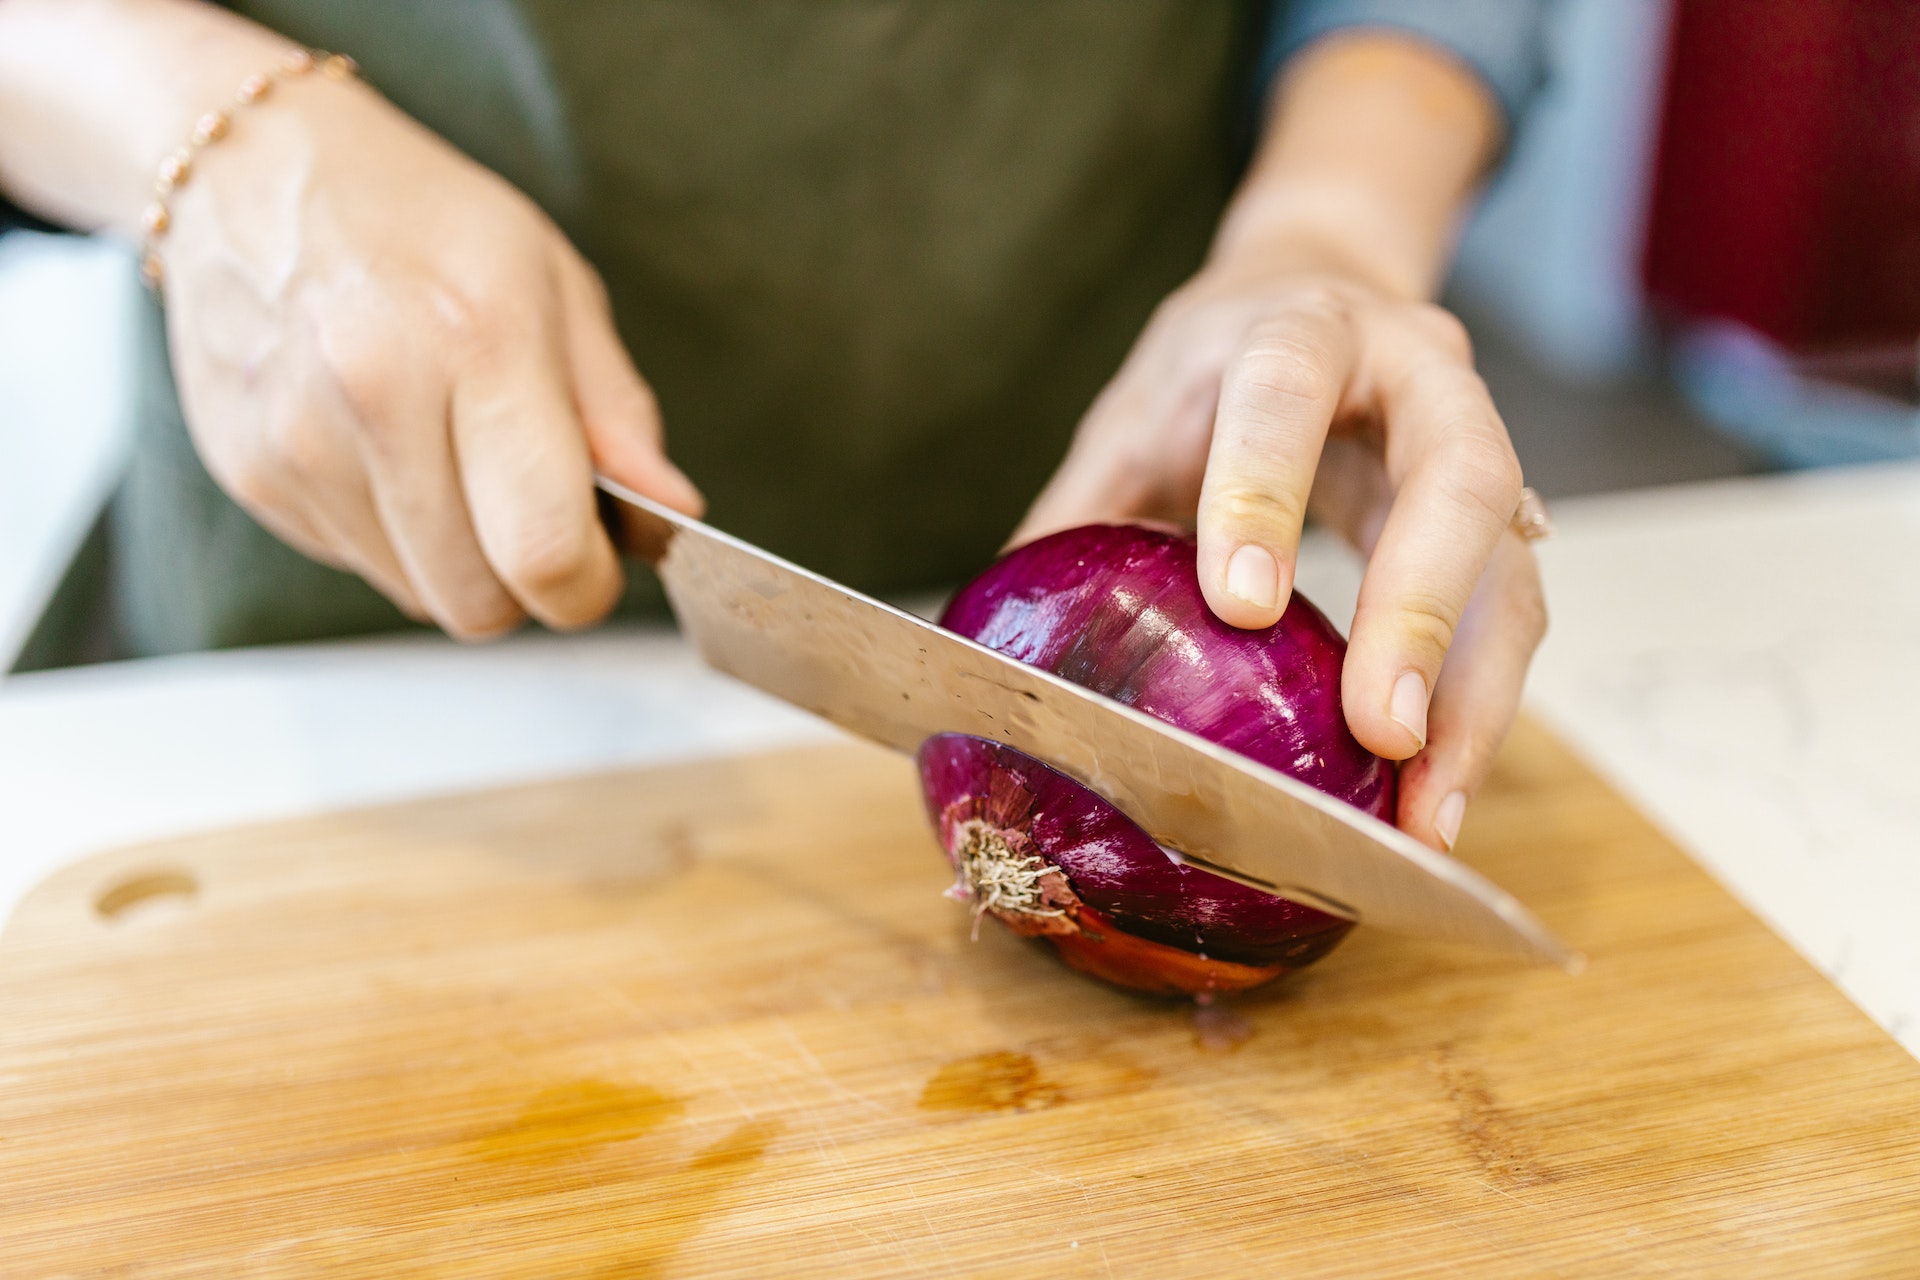 Never remove the onion root when cutting